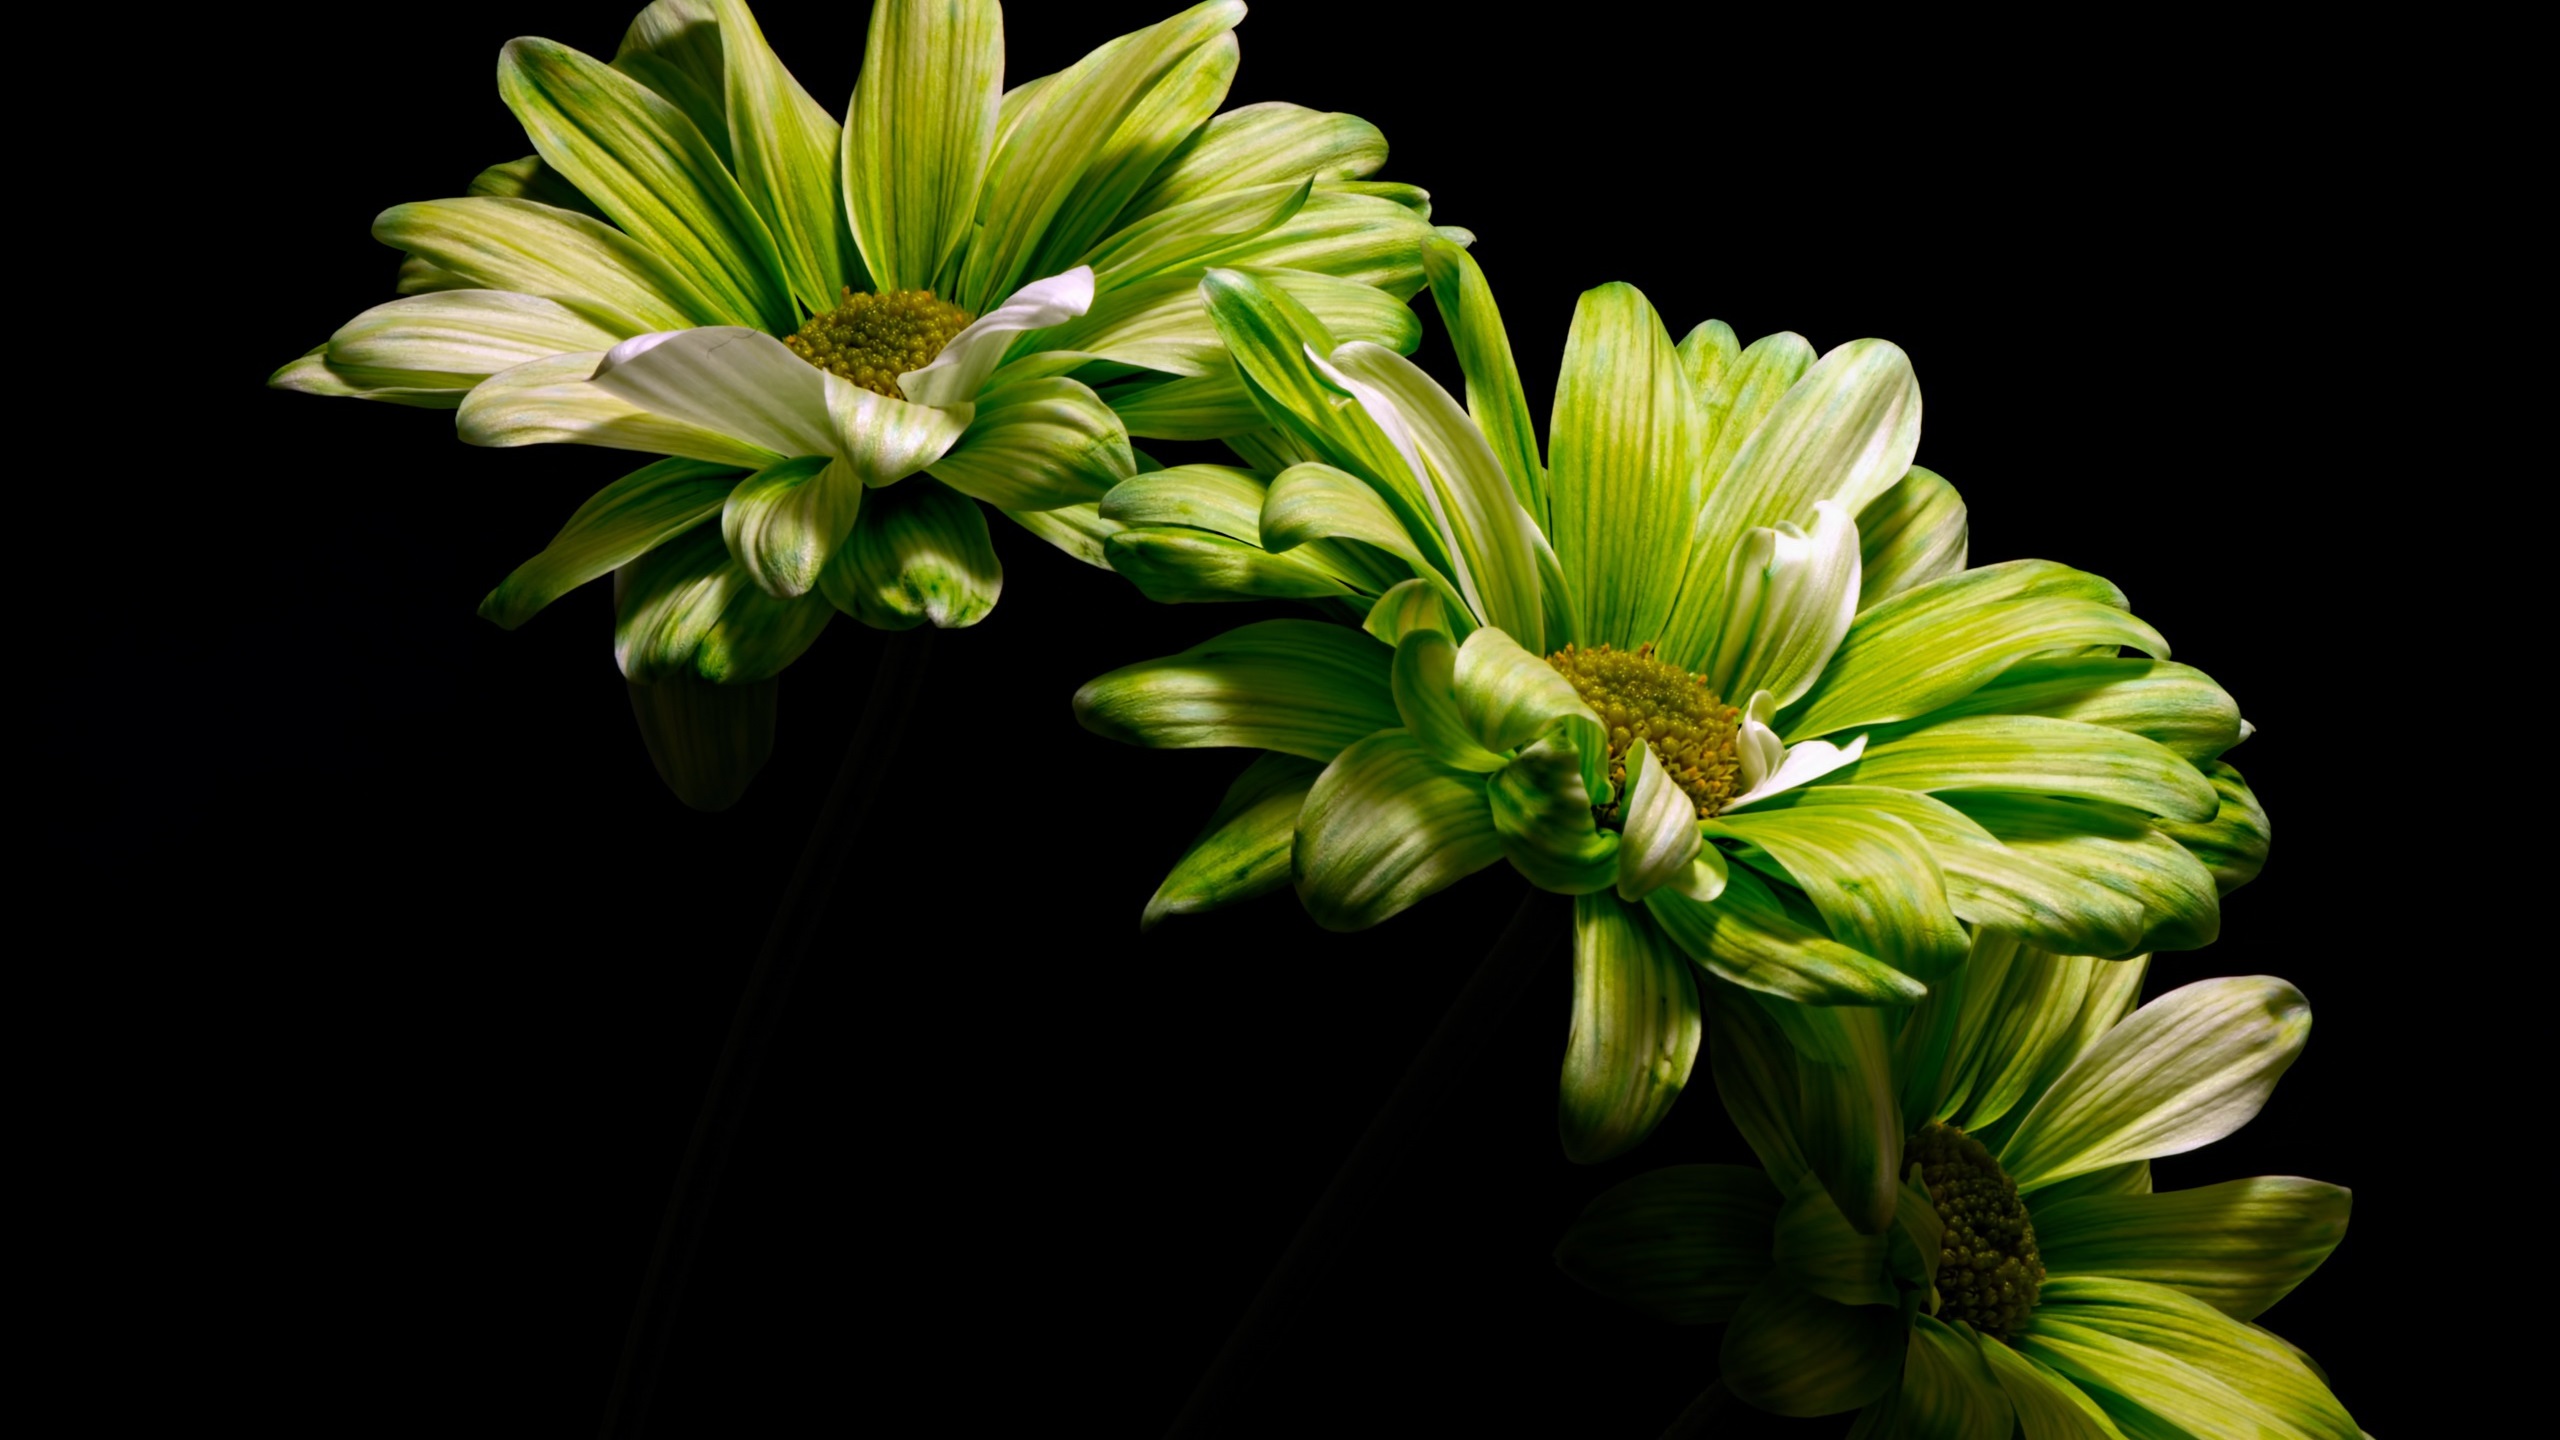 Wallpaper Green flowers, black background 2560x1600 HD Picture, Image